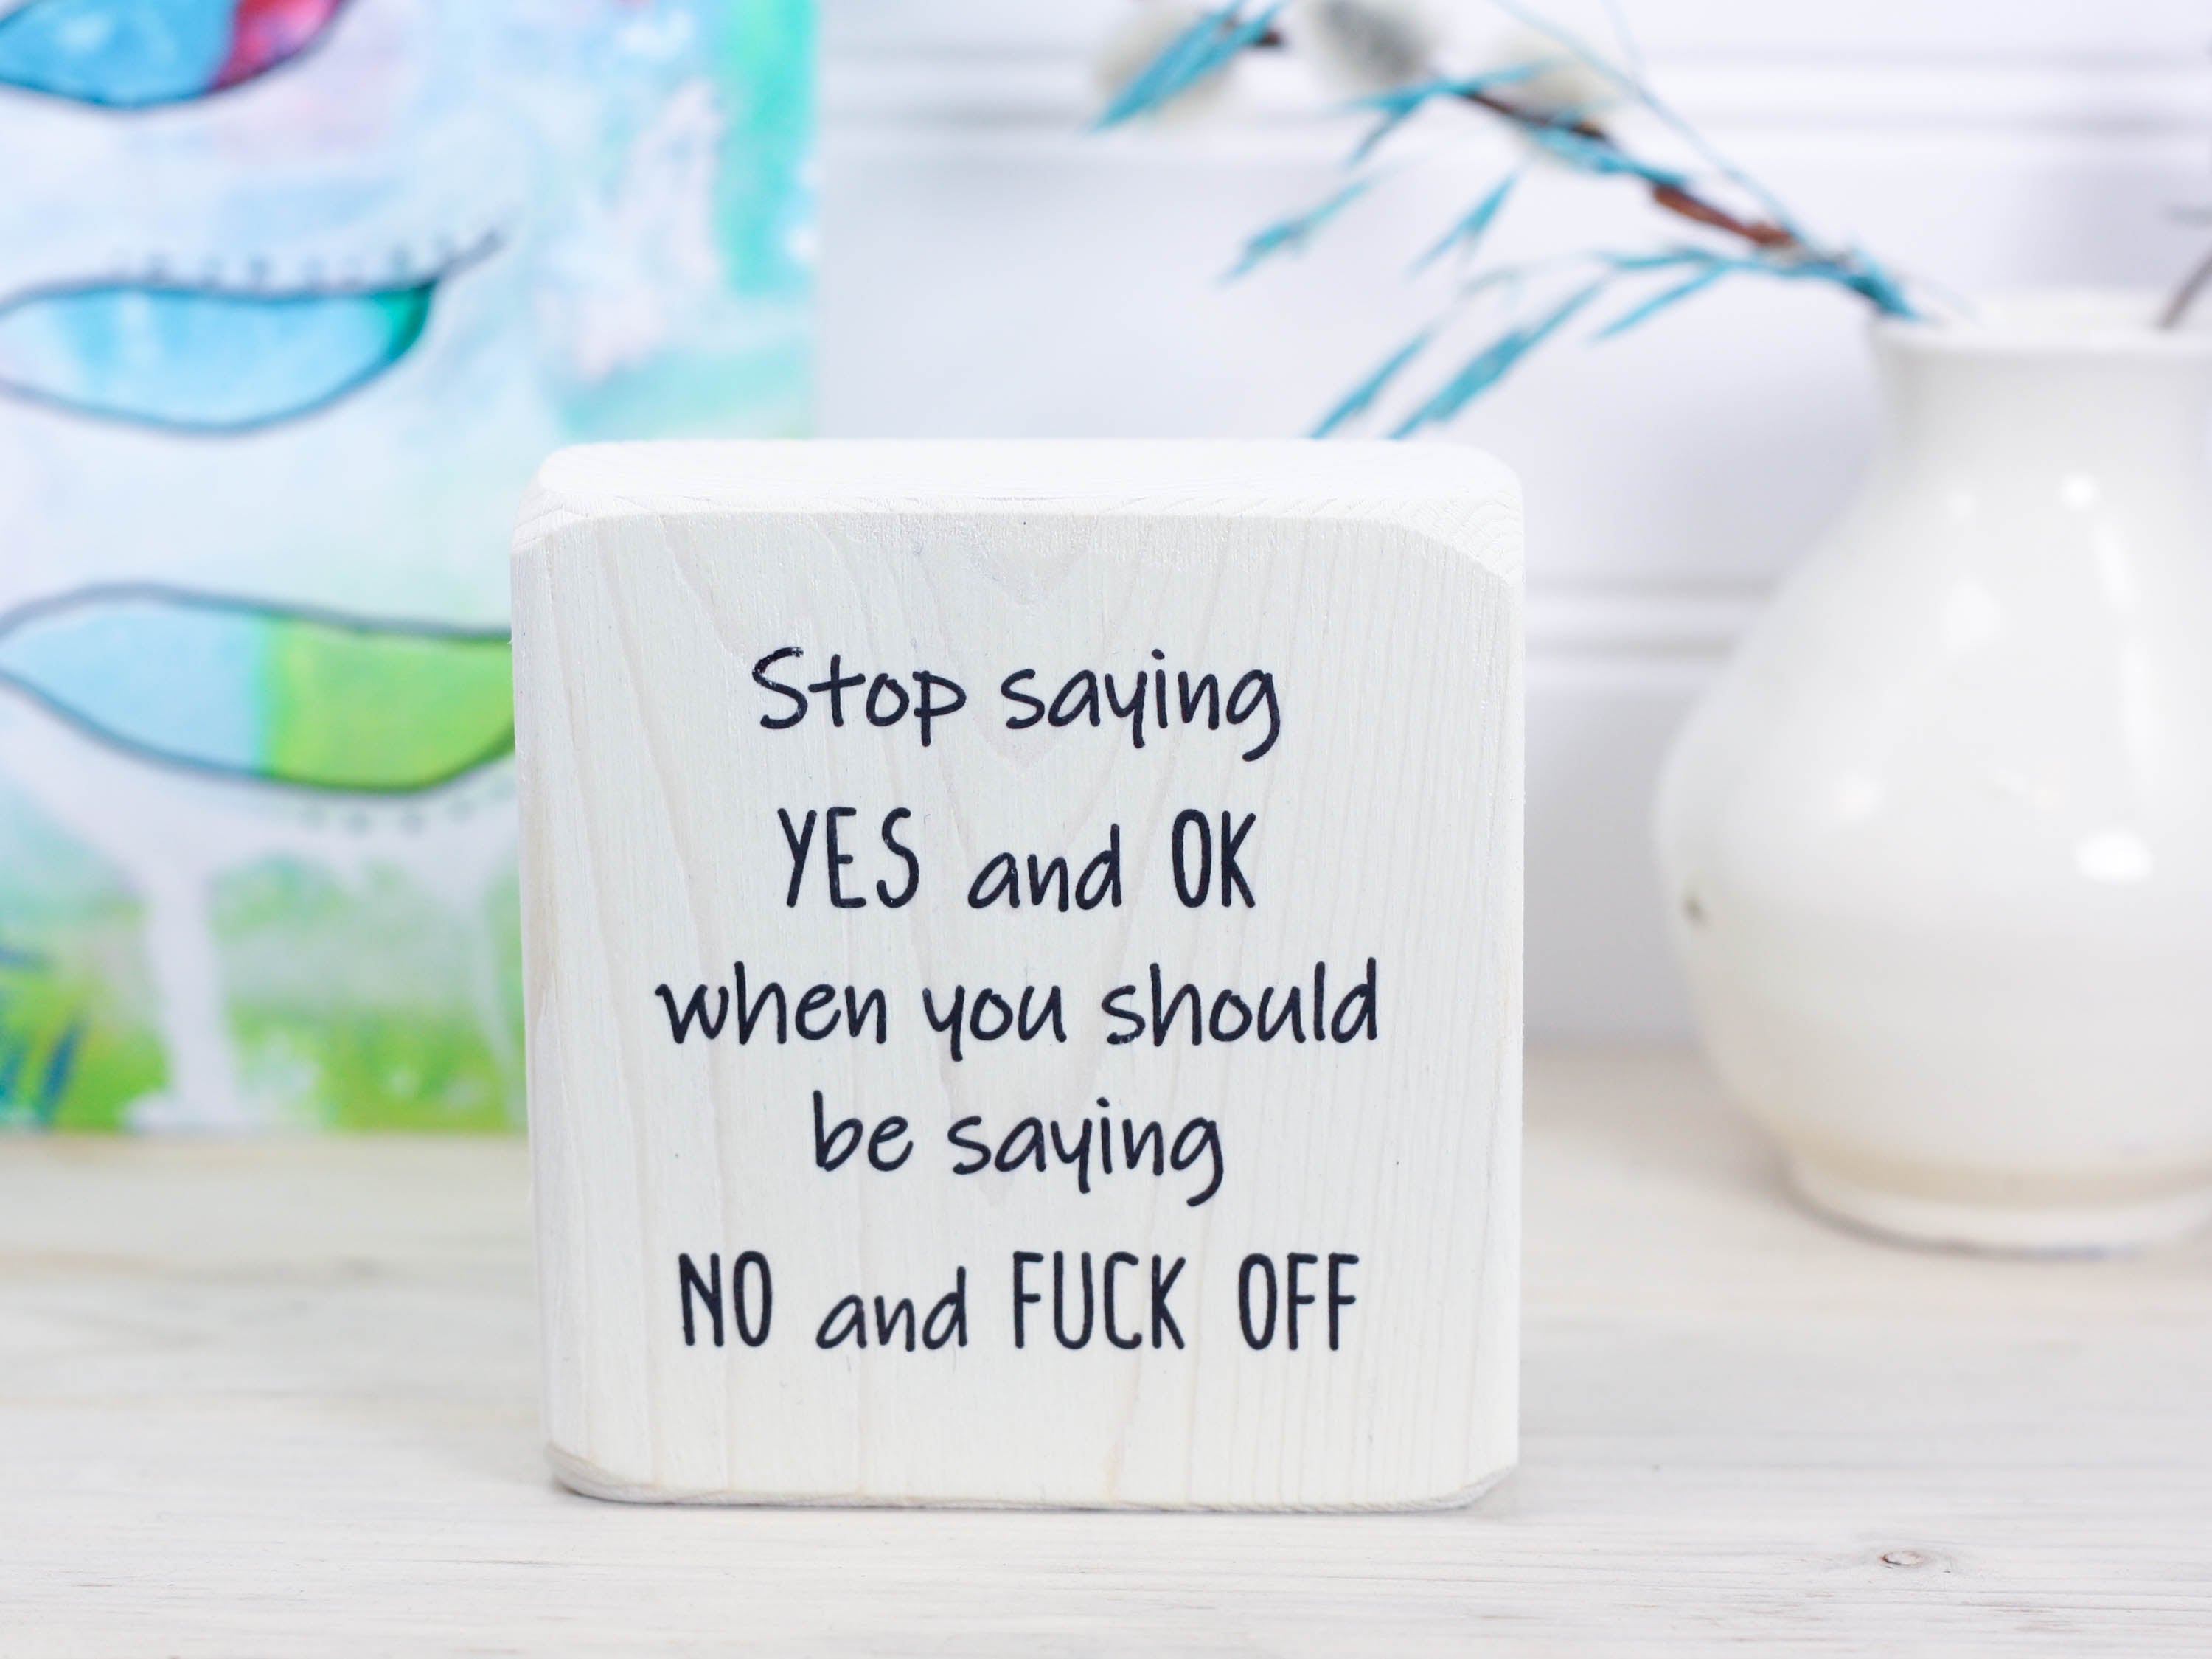 Small whitewash freestanding wood sign with the text "stop saying yes and ok when you should be saying no and fuck off"